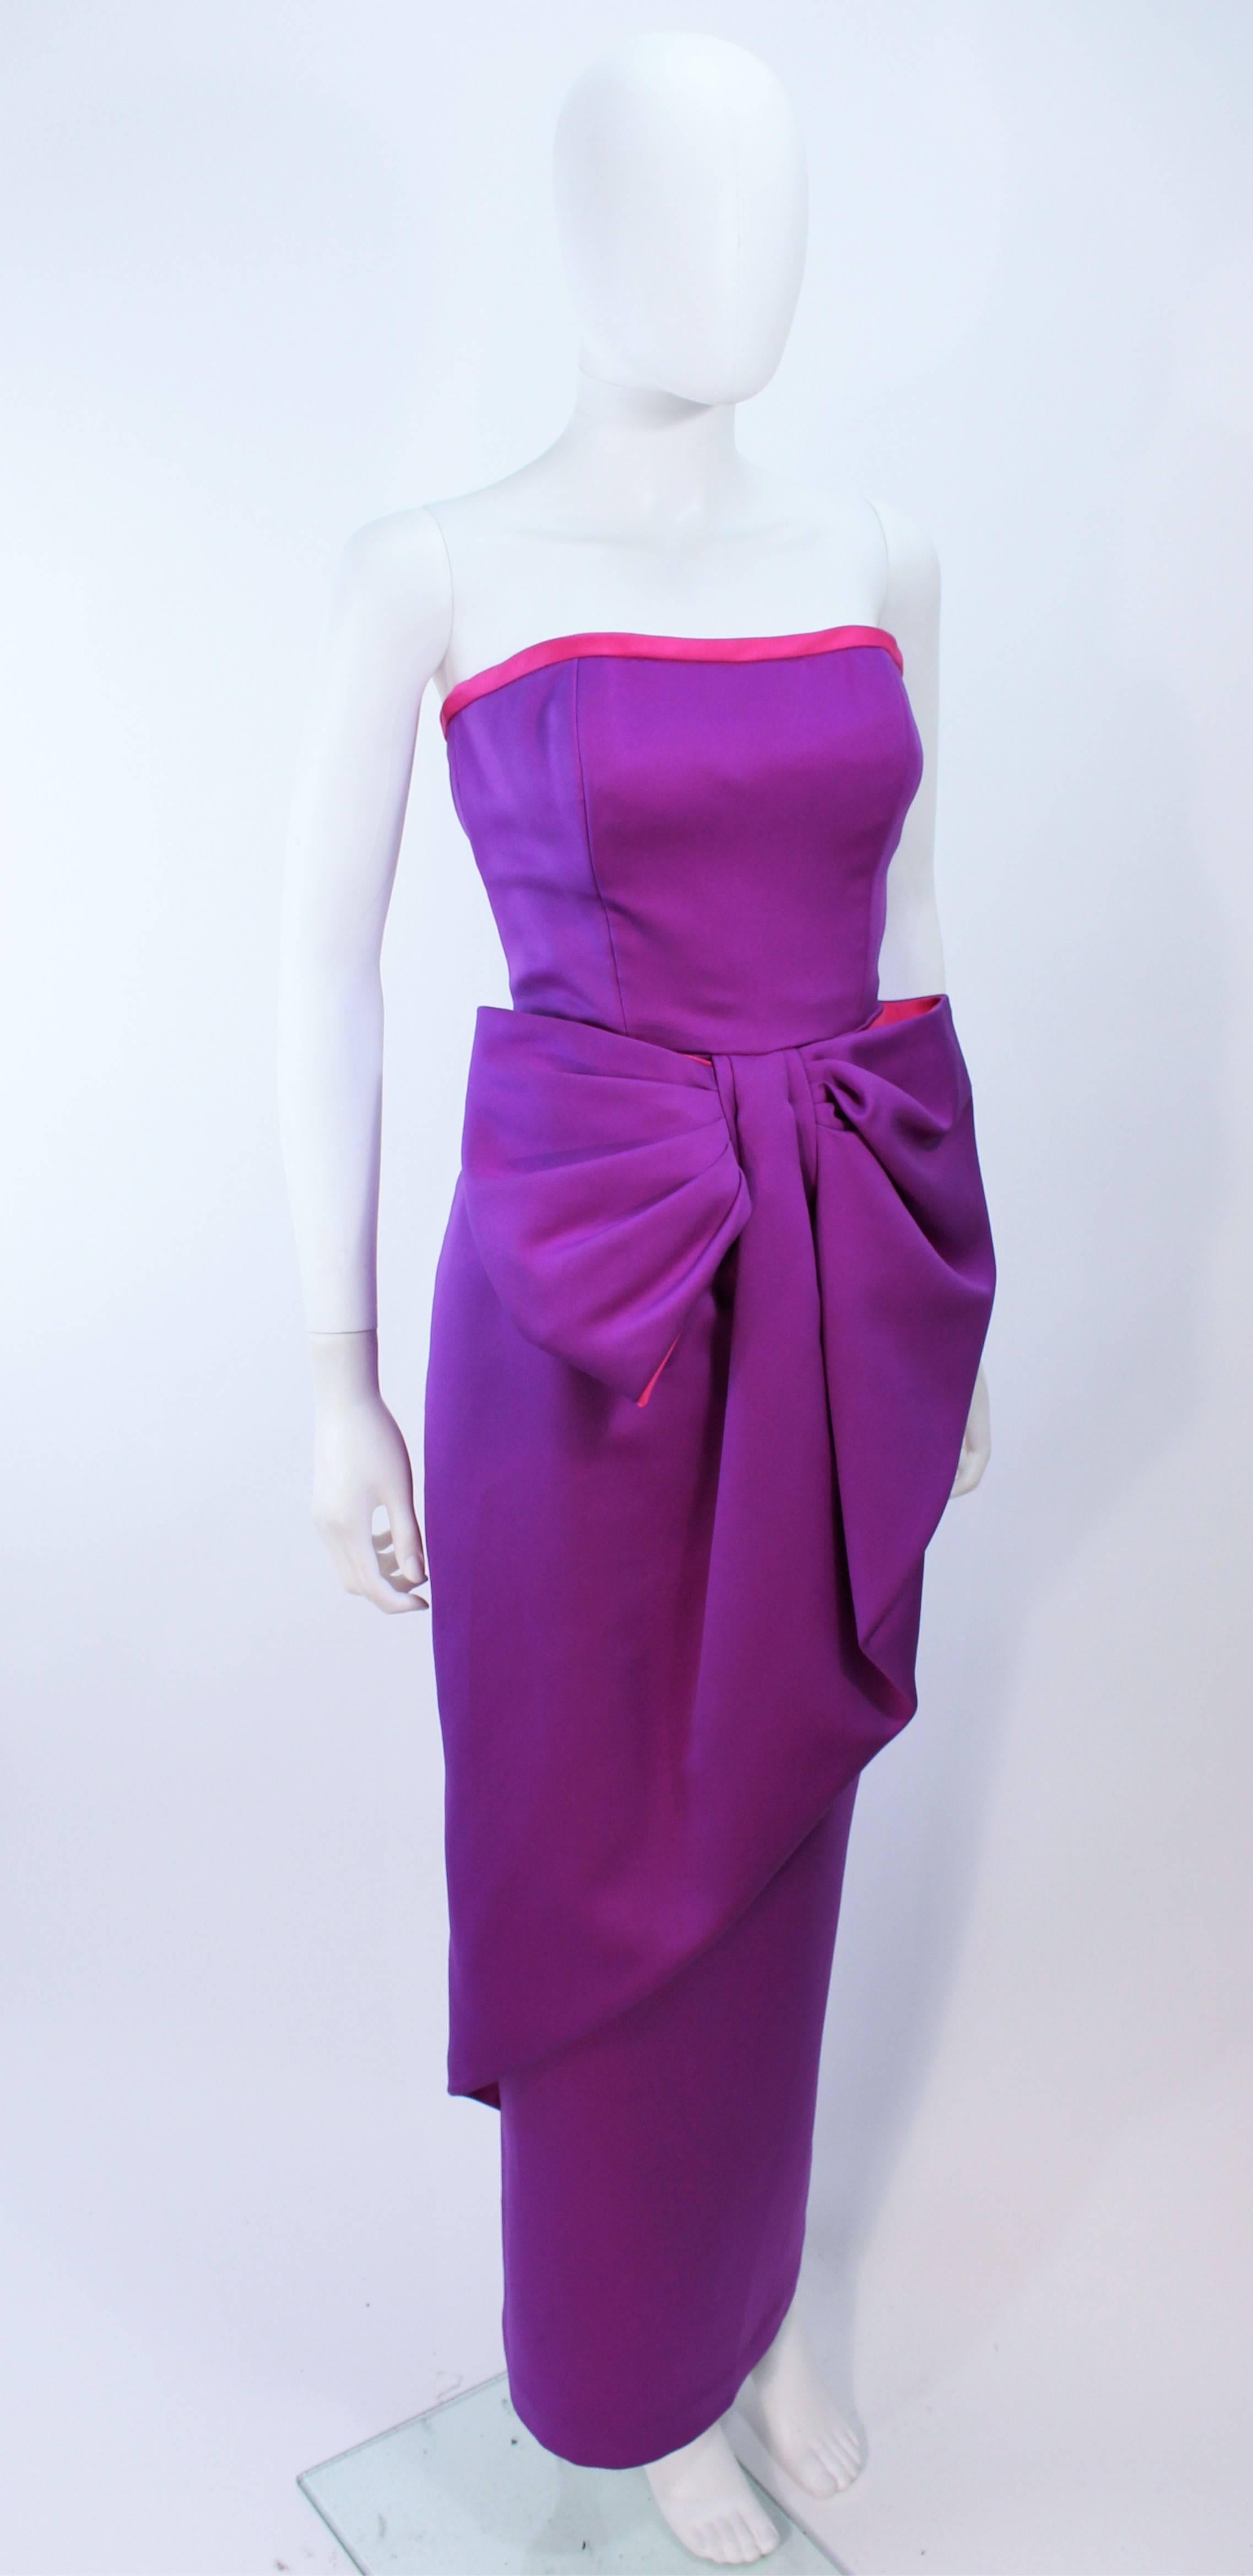 Women's VICTOR COSTA Purple and Magenta Draped Bow Gown Size 8 10